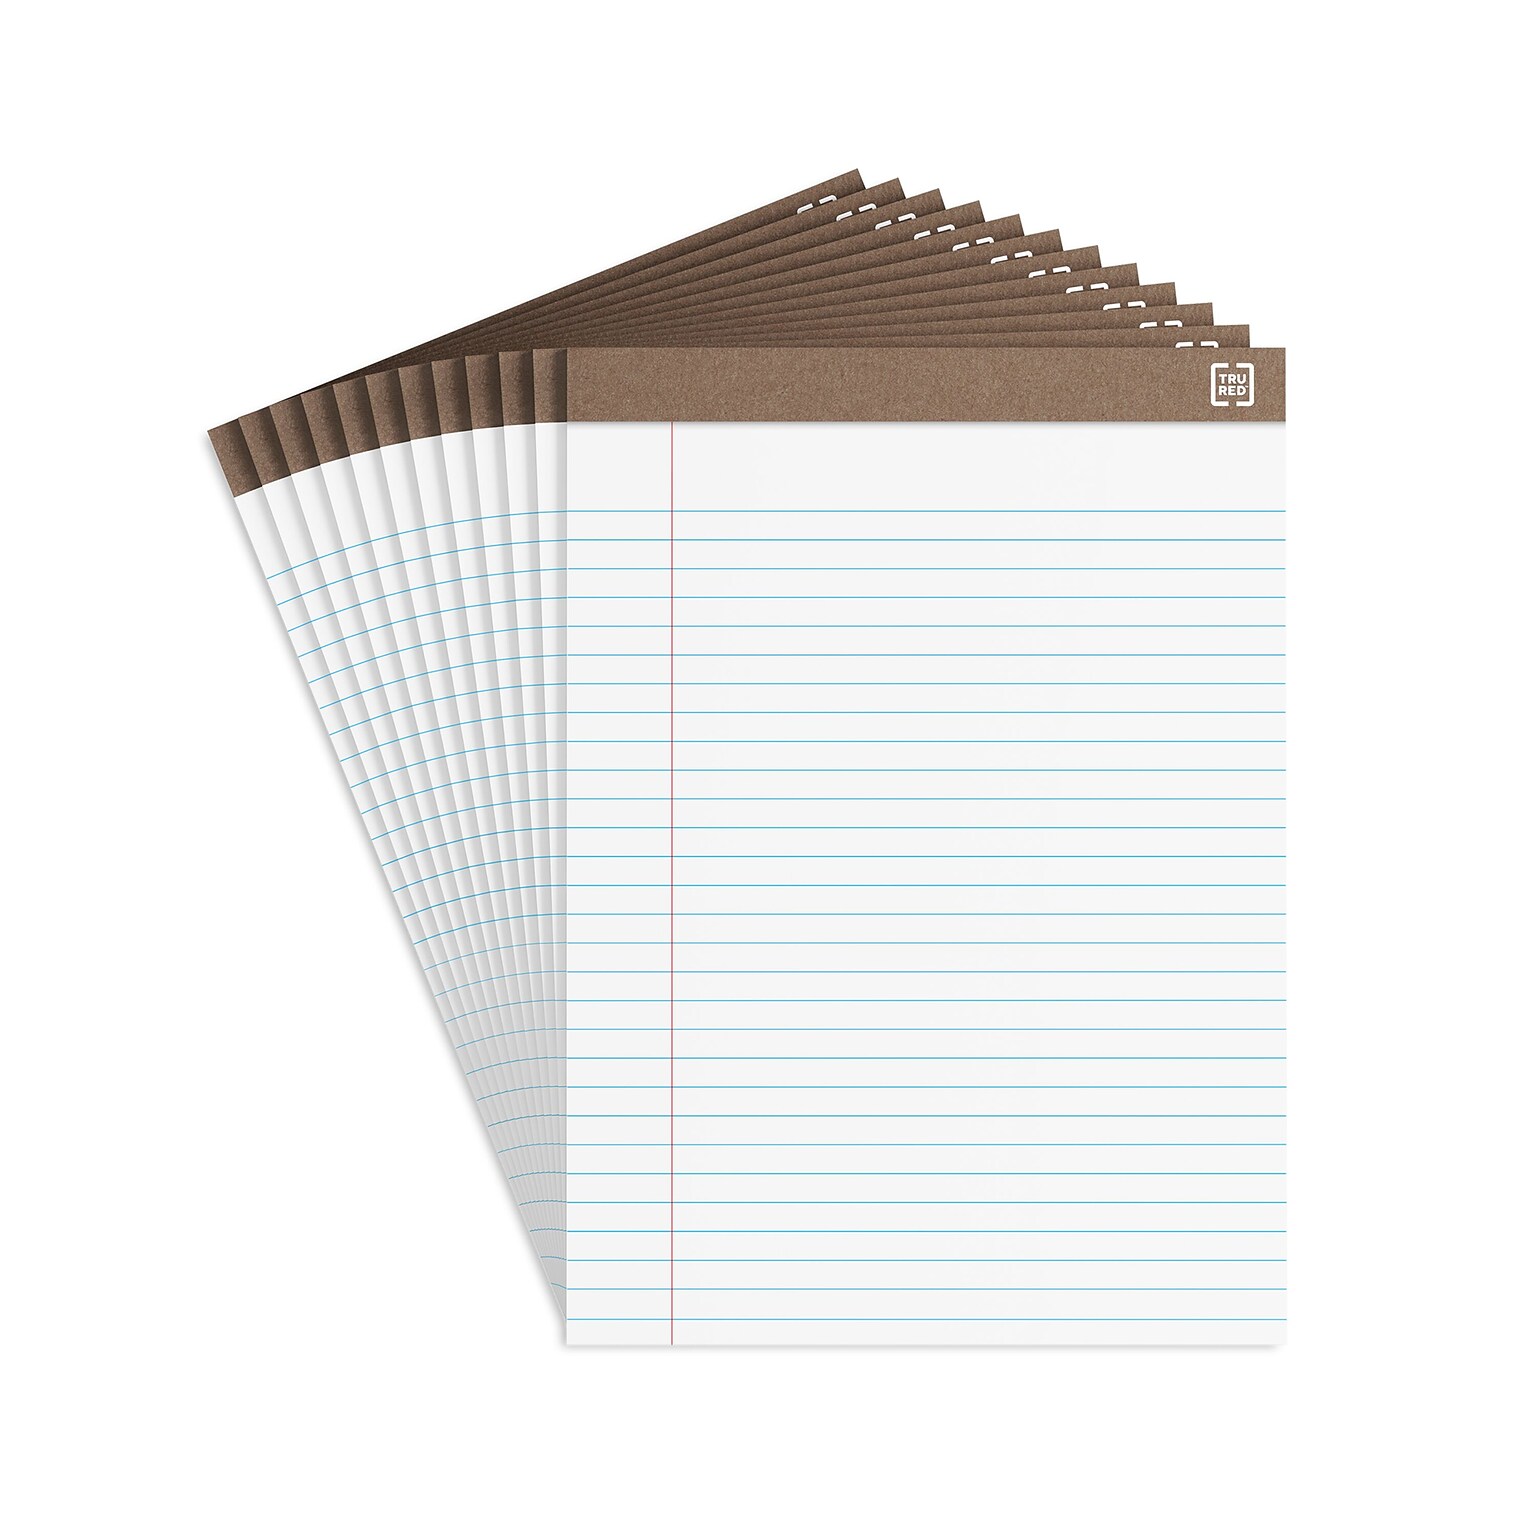 TRU RED™ Notepads, 8.5 x 11.75, Wide Ruled, White, 50 Sheets/Pad, Dozen Pads/Pack (TR58185)